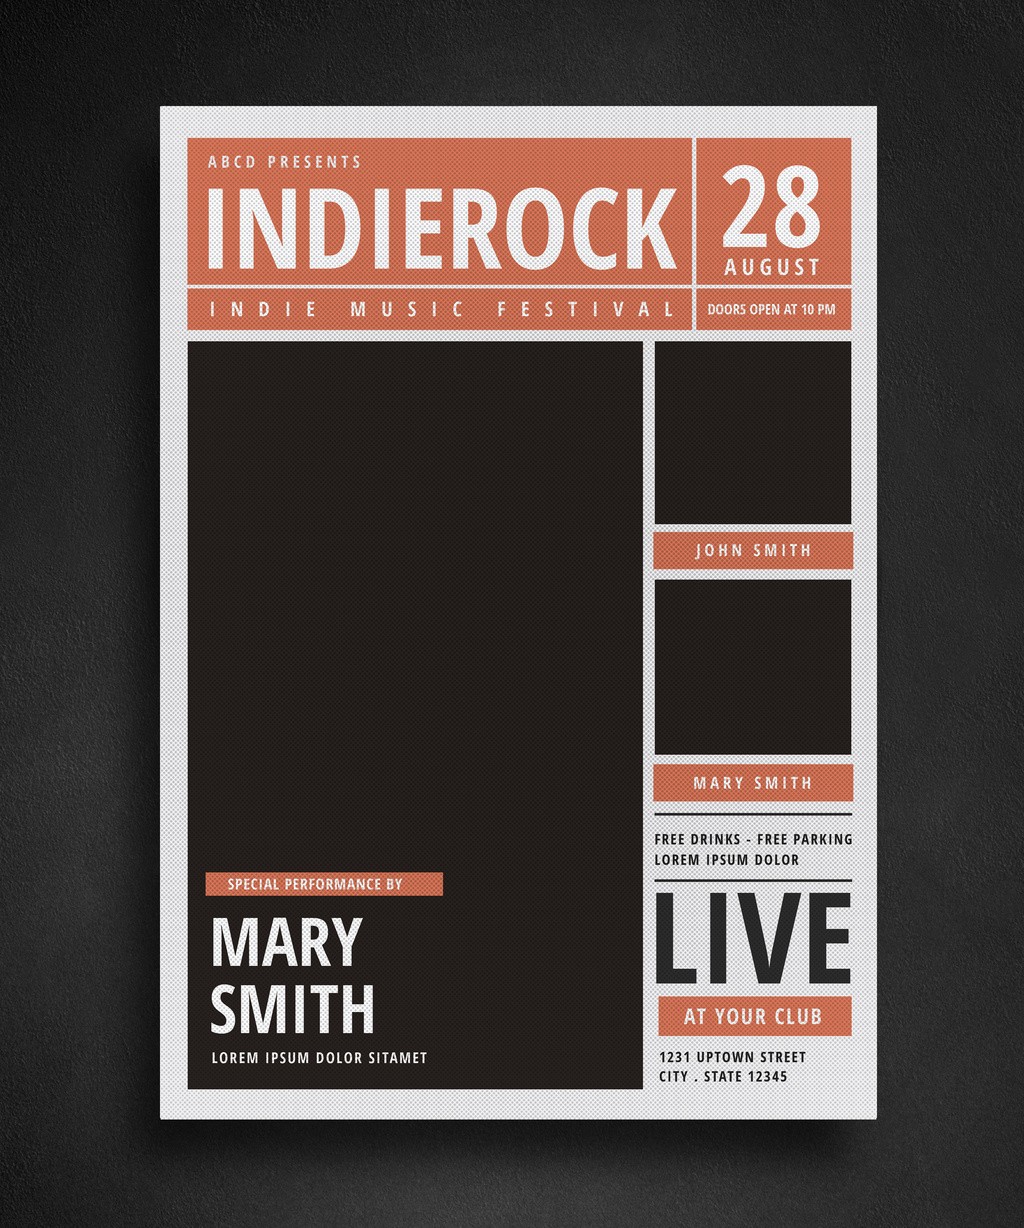 Indie rock band performing on a newspaper-style flyer template, ready for customization and promotion of music events.